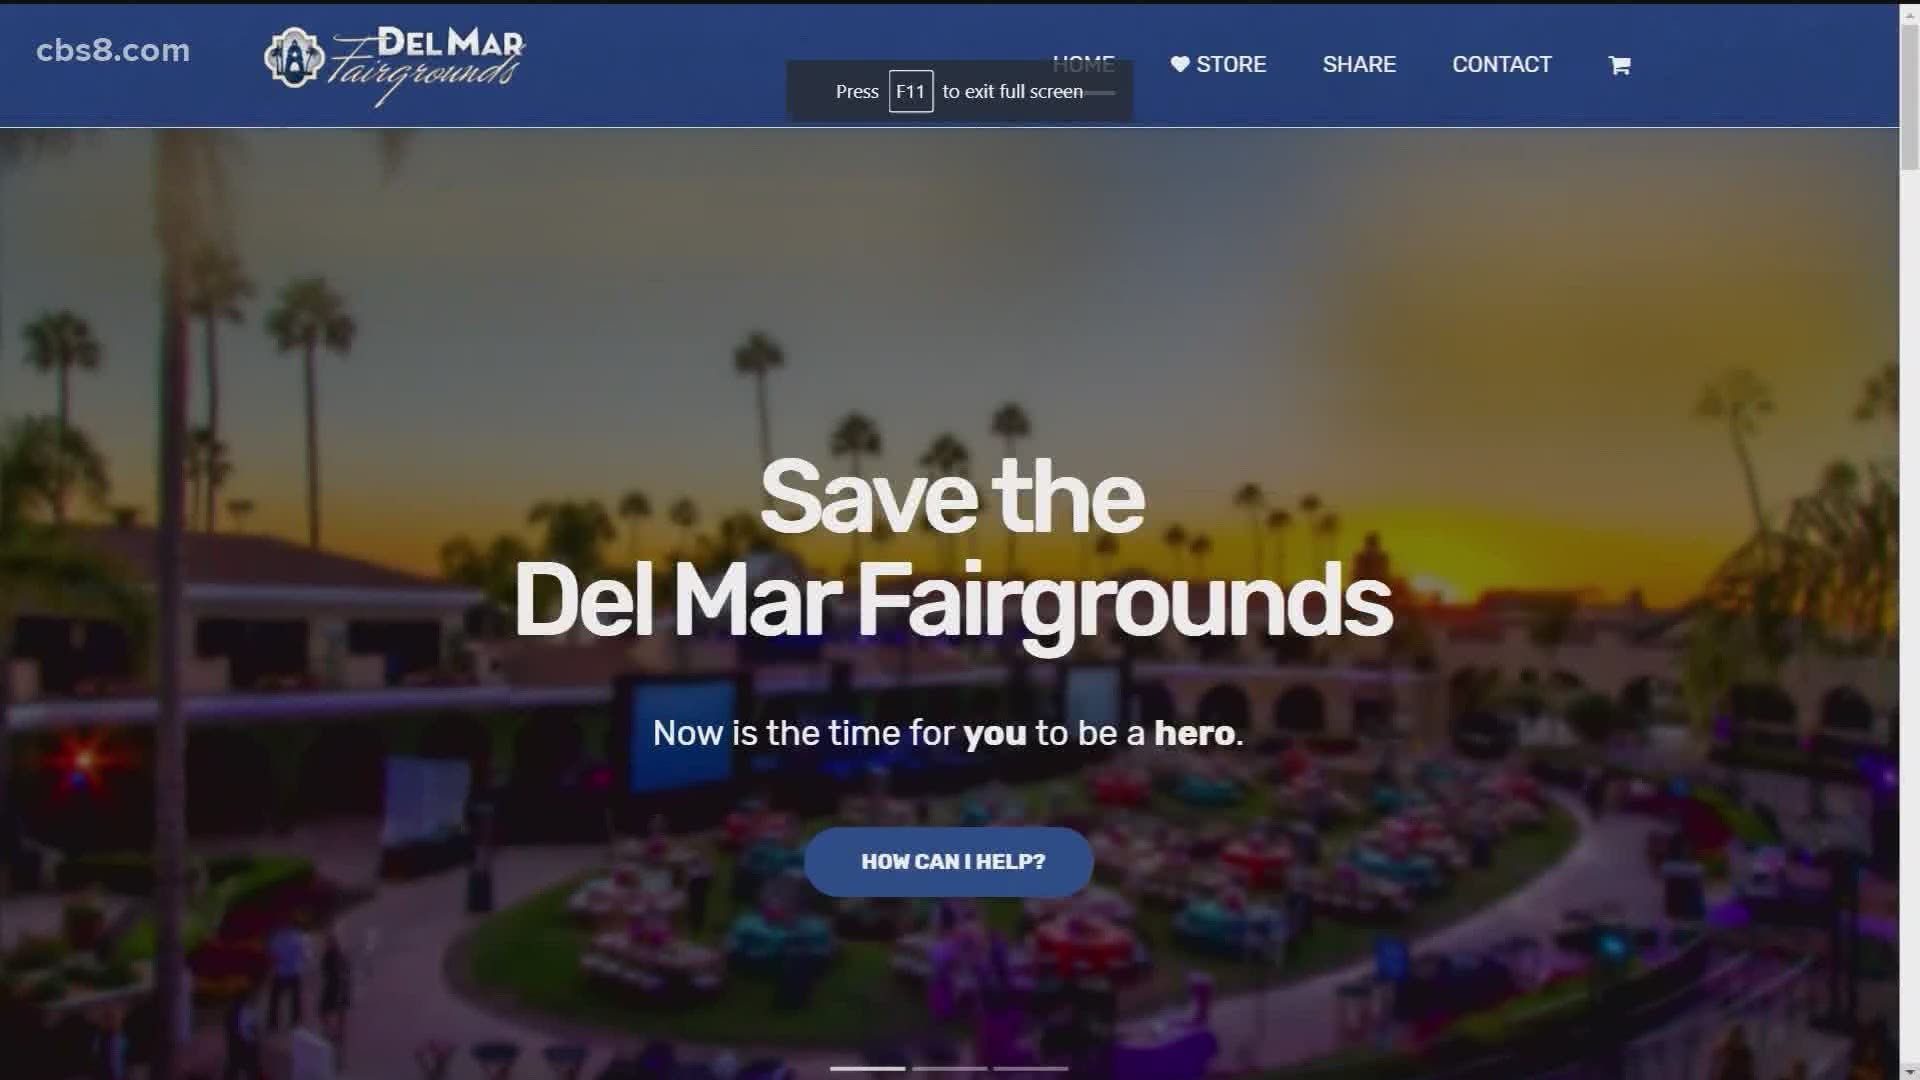 The financial fallout from COVID-19 is now threatening the Del Mar Fairgrounds, and without more money, the fairgrounds are at risk of shutting down.